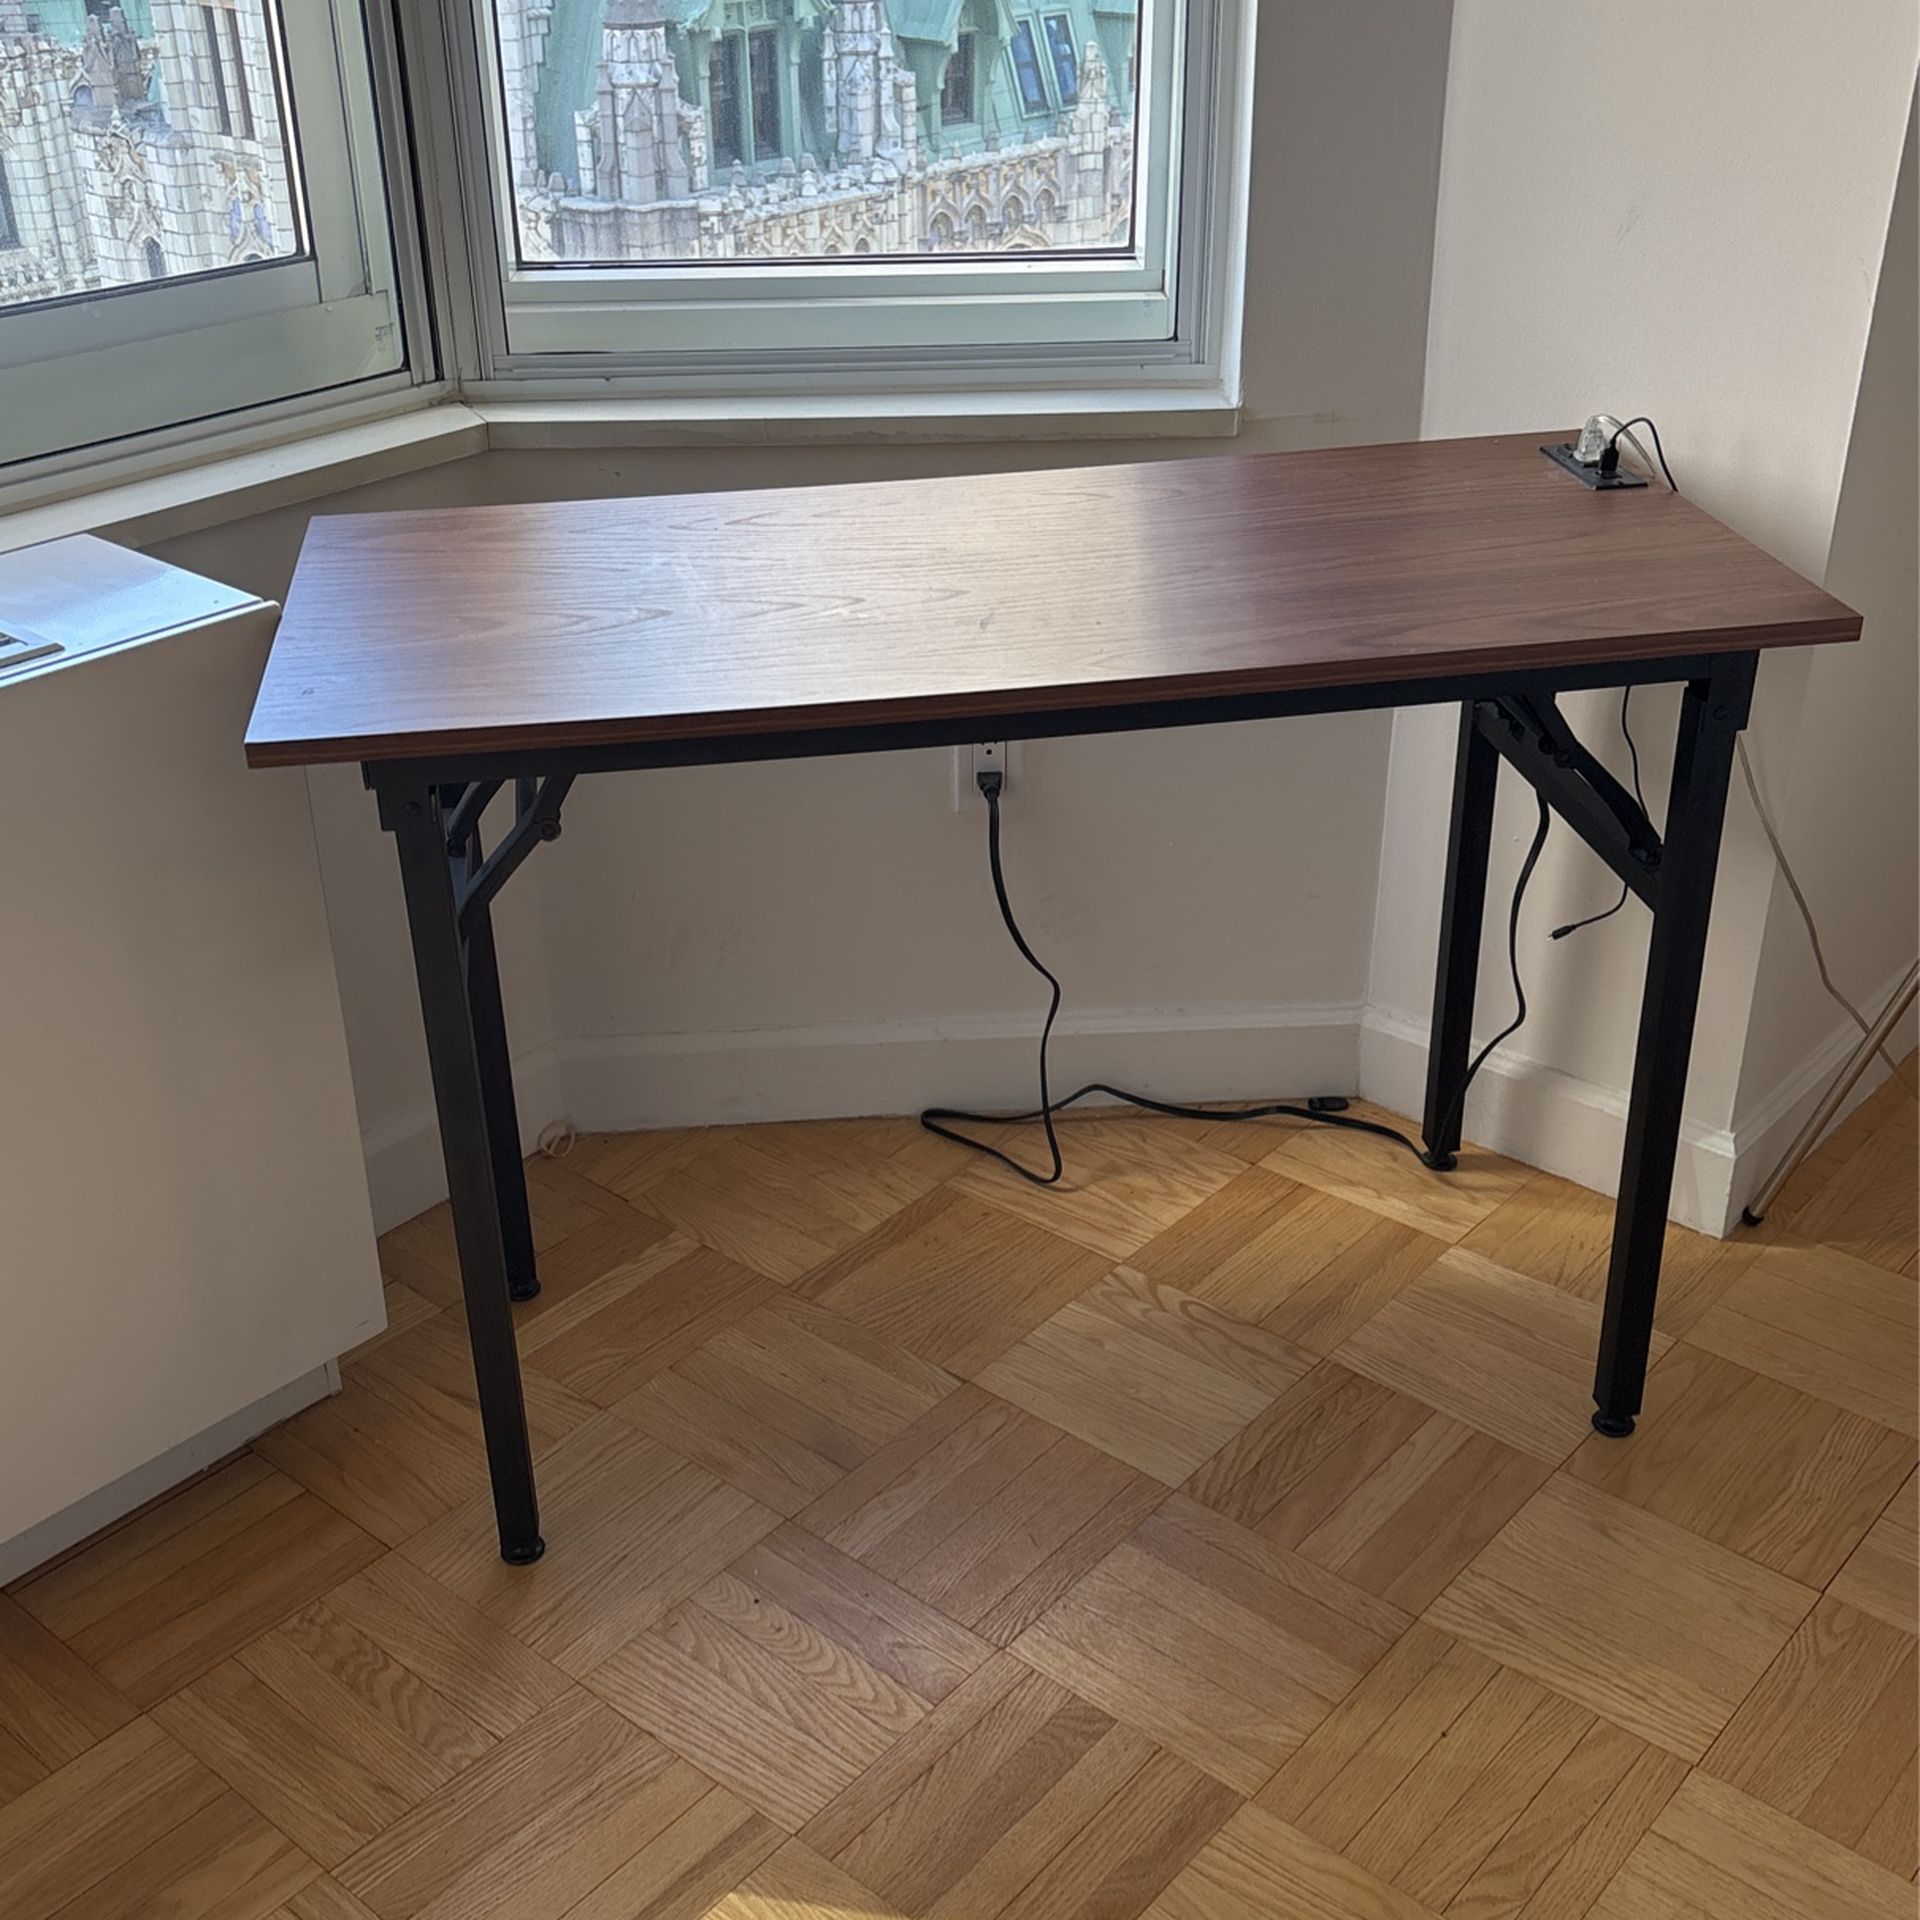 Free: foldable Desk Table With Built-in Power